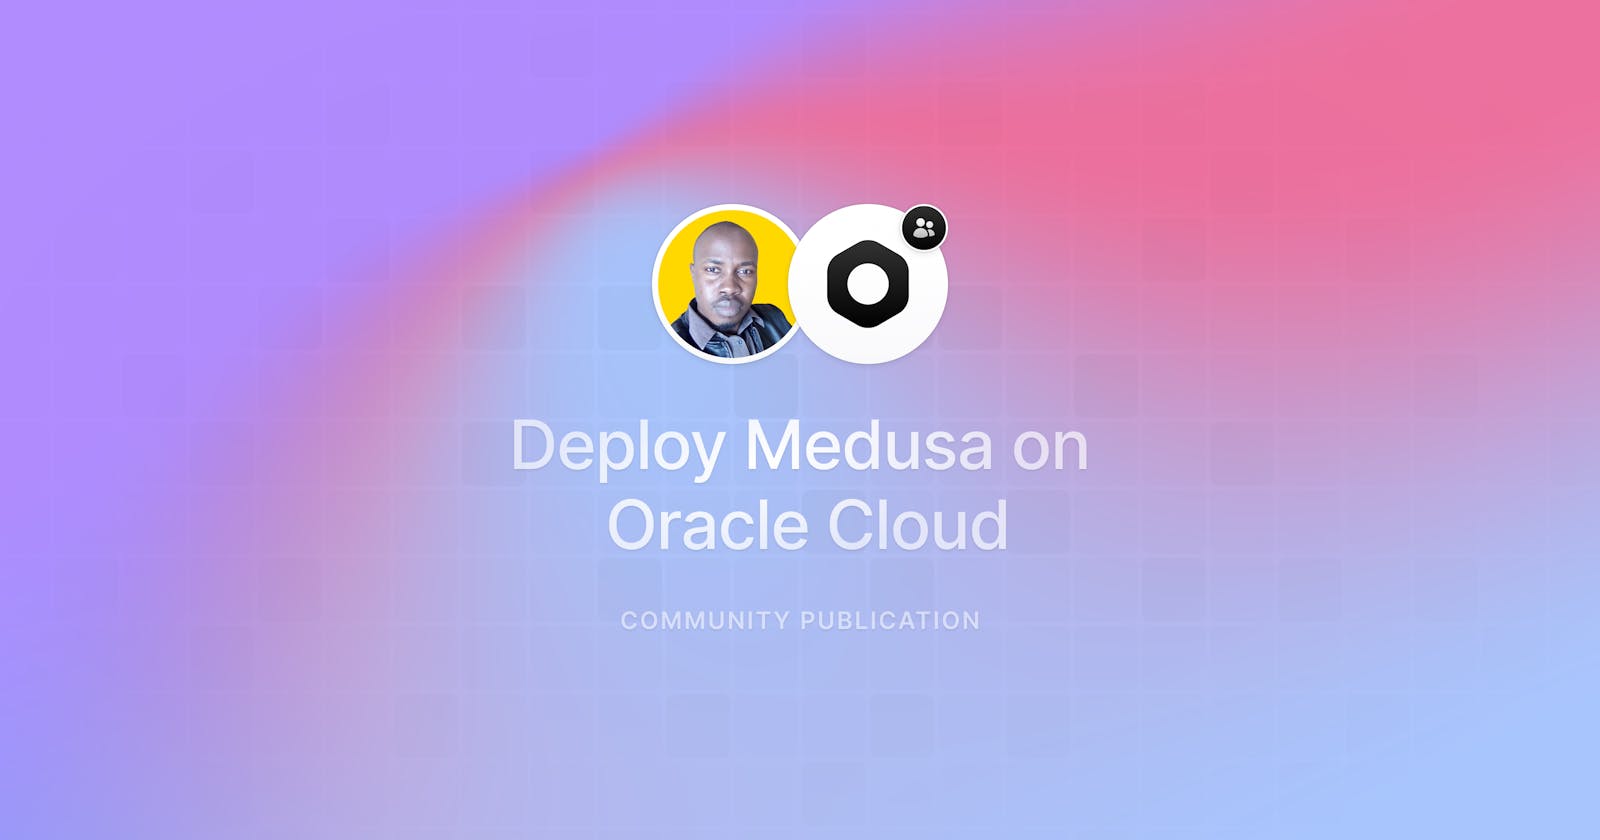 Deploying Medusa to Oracle Cloud